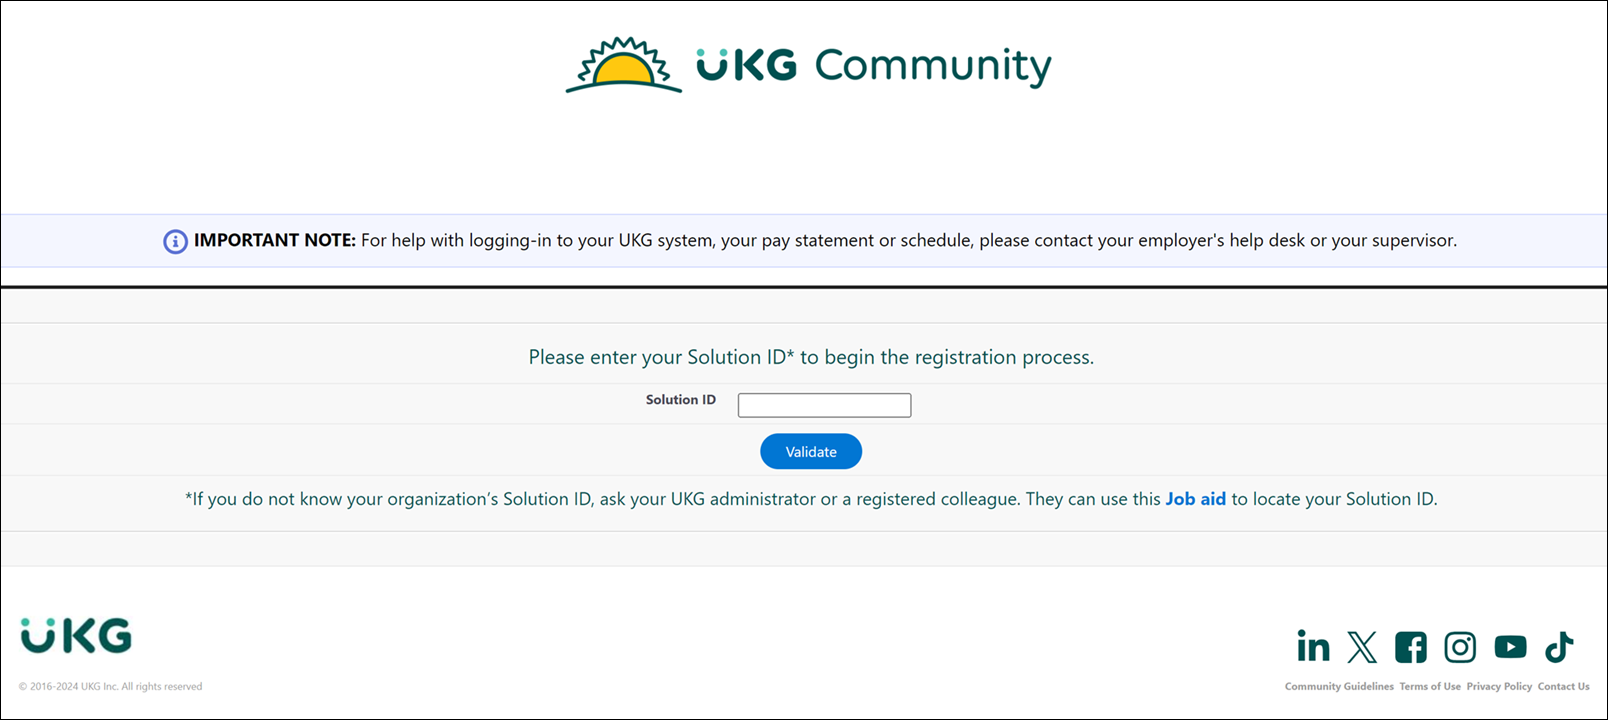 Register to The UKG Community with Solution ID.